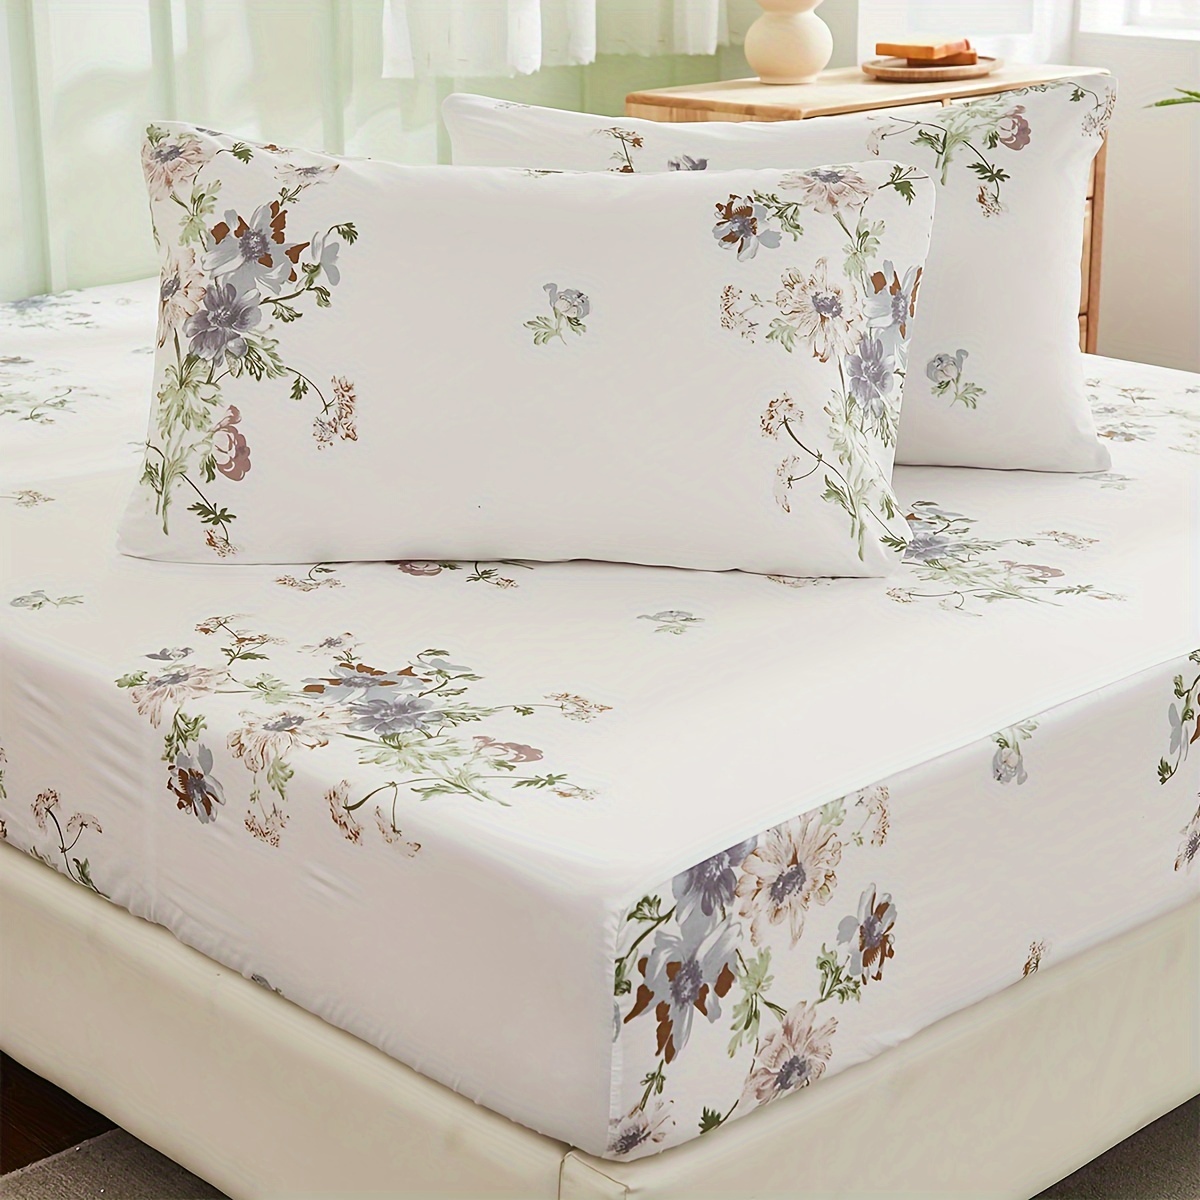 

3pcs Elegant Flower Print Fitted Sheet Set, Soft Comfortable Breathable Bedding Mattress Protector Set, For Bedroom, Guest Room (1* Fitted Sheet + 2*pillowcases, Without Core)